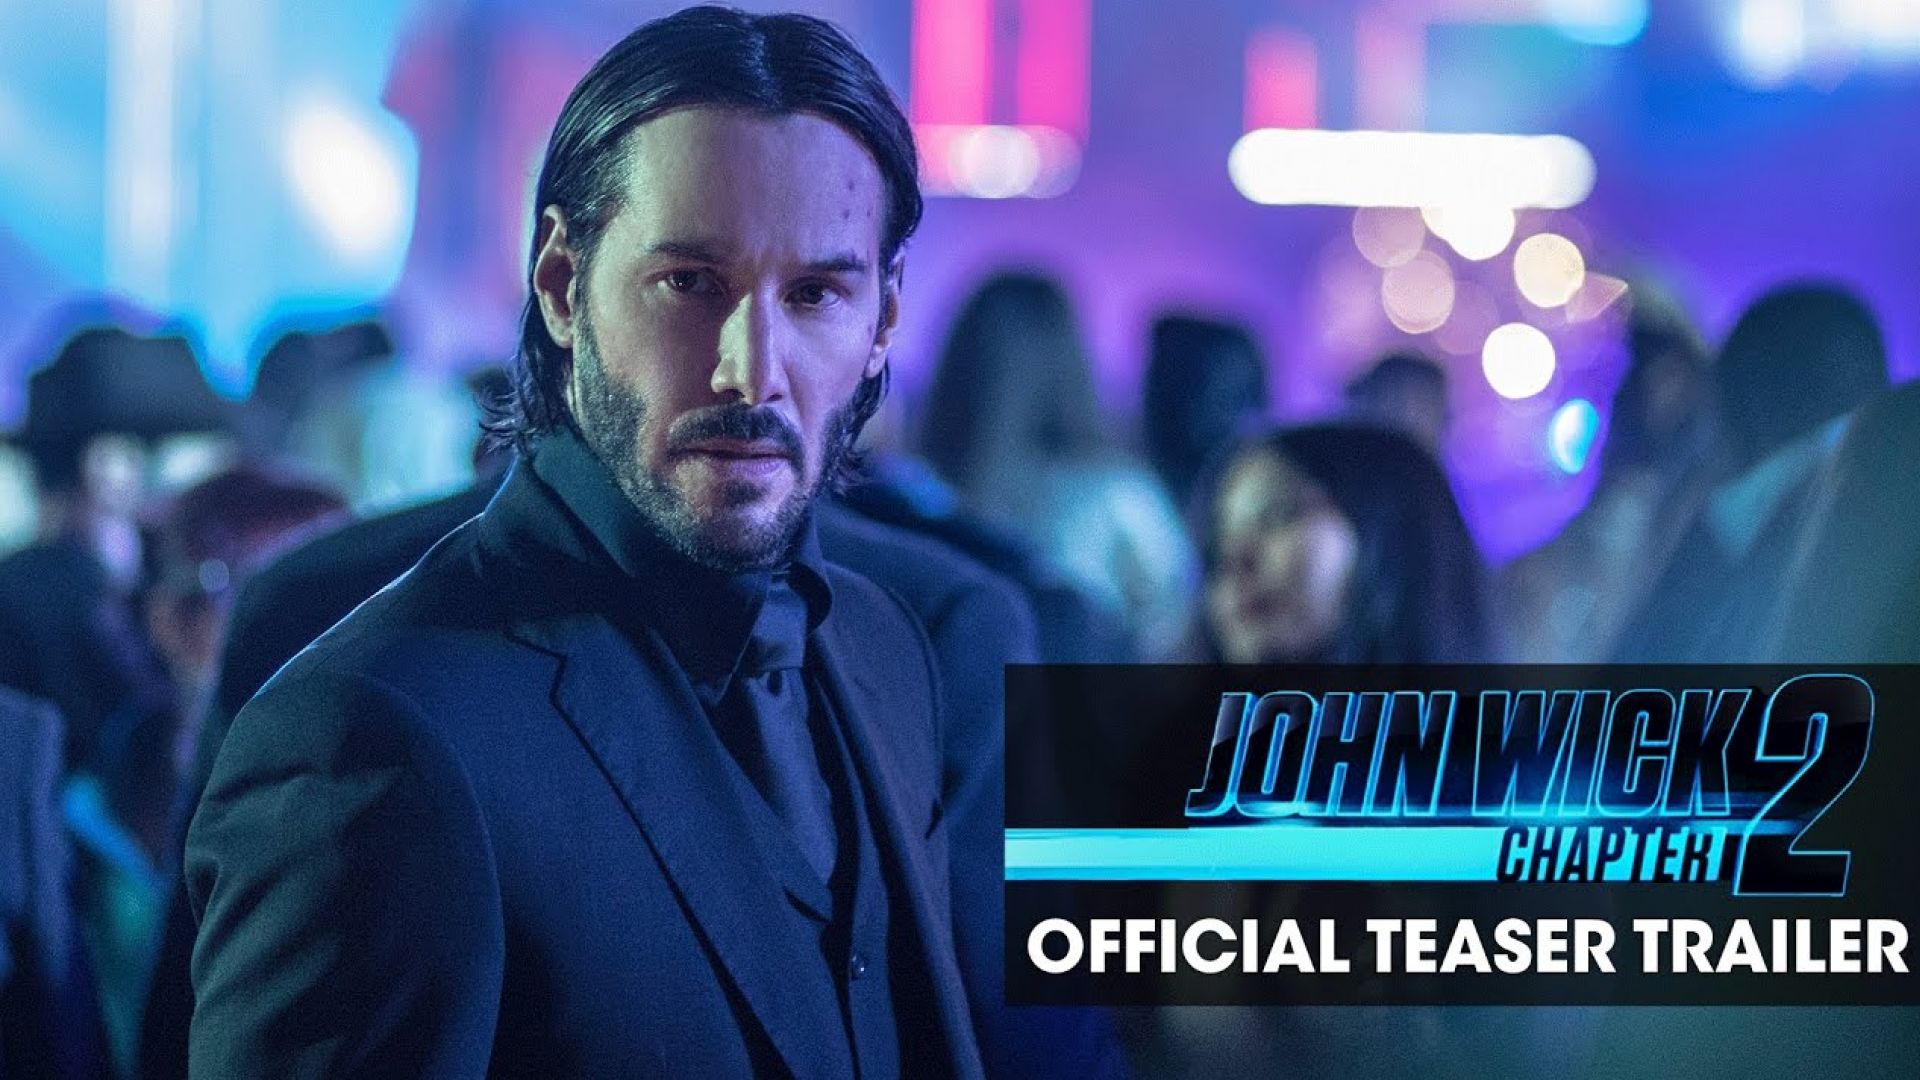 The first trailer for John Wick 2 has landed!